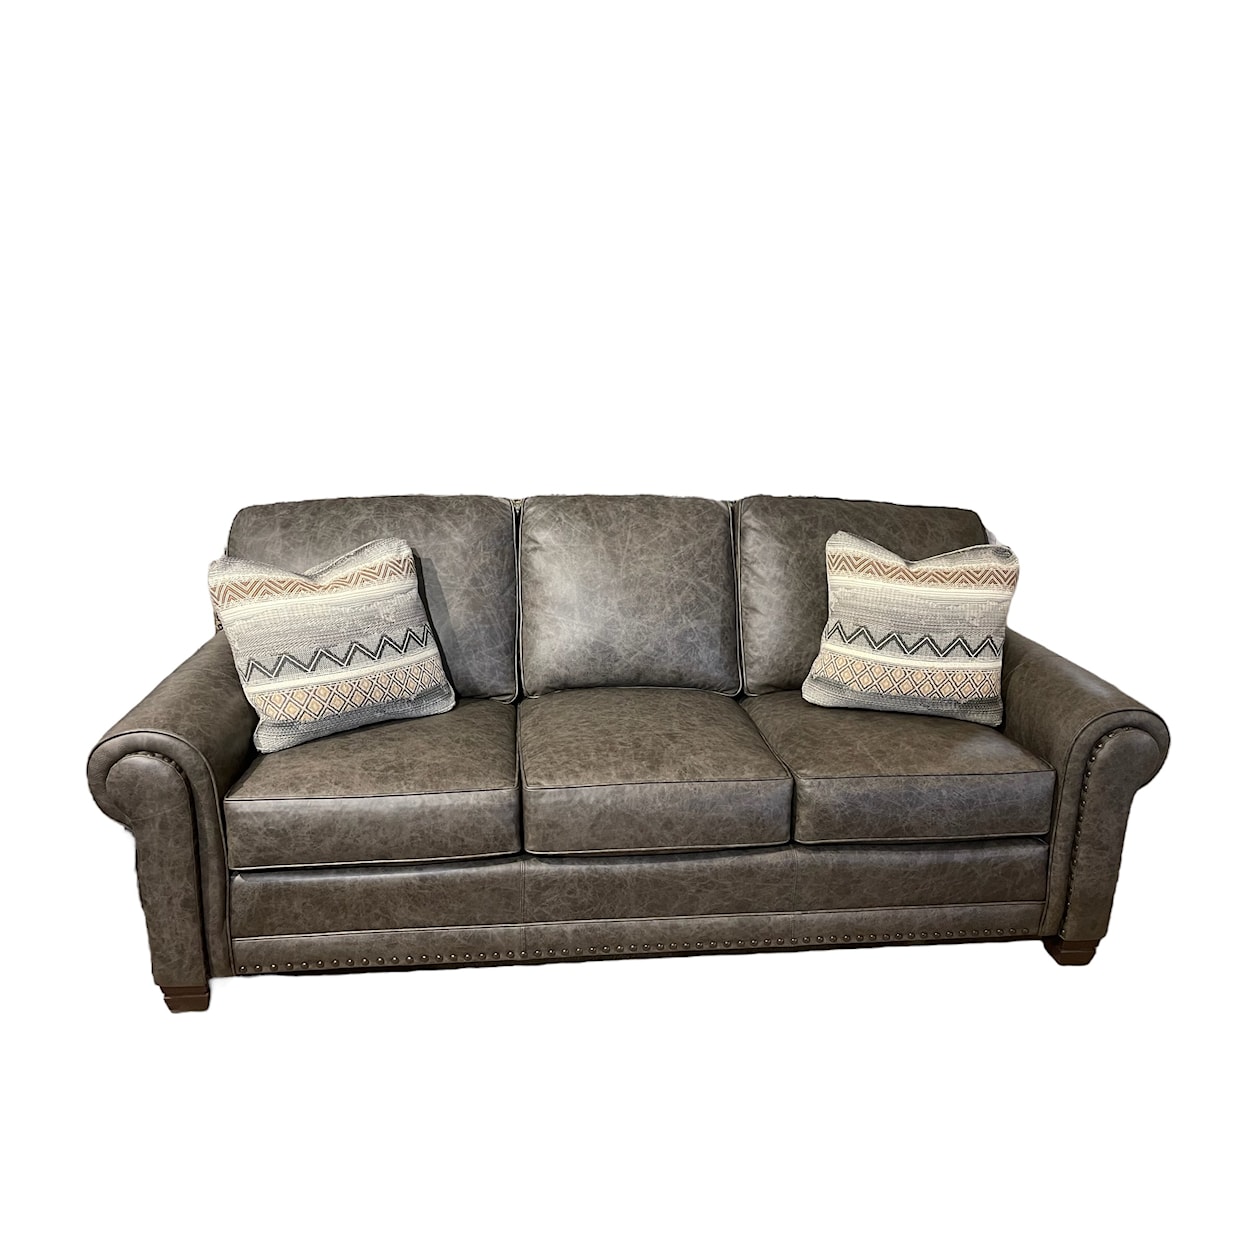 Smith Brothers Sectionals and More Leather Sofa with Pillows Included